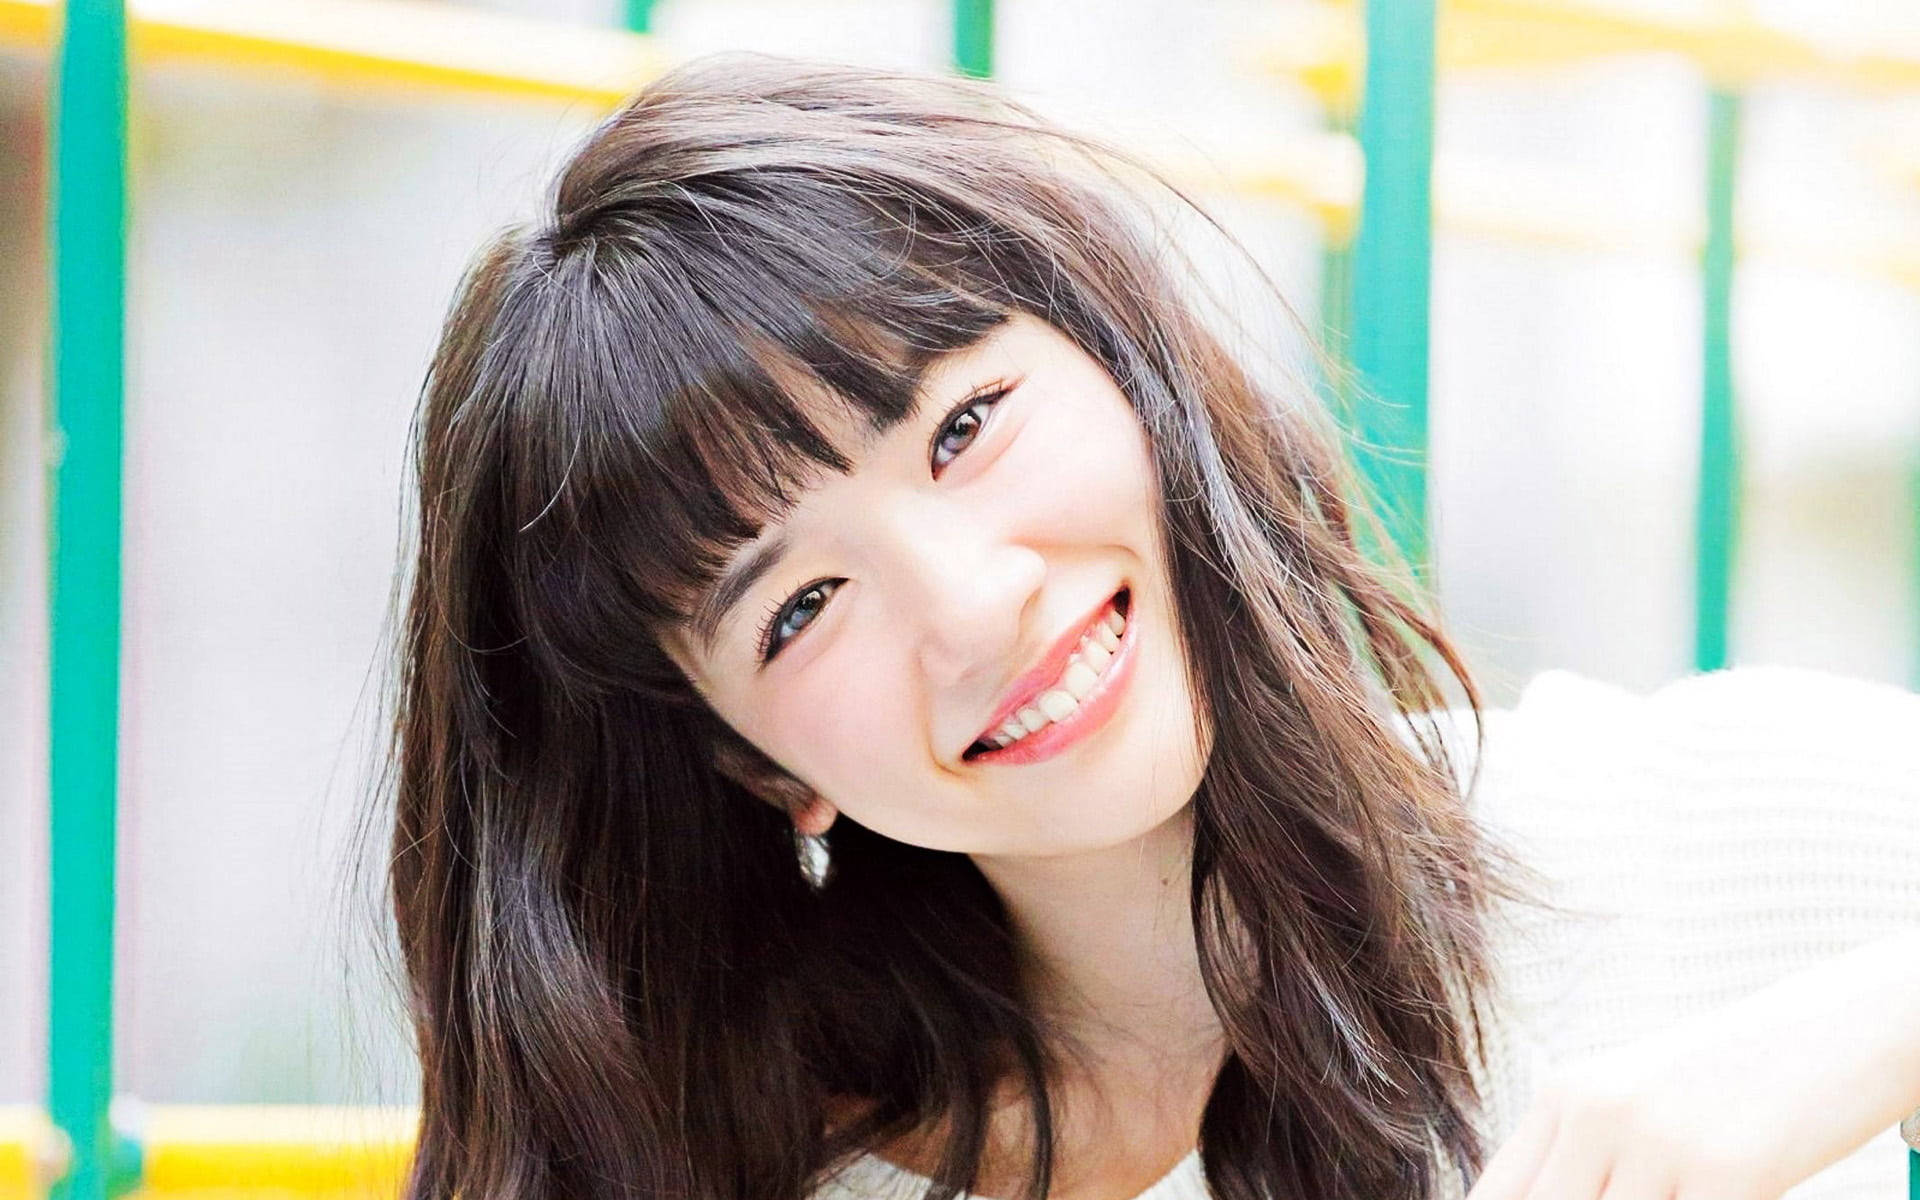 Smiling Japanese Girl With Messy Hair Wallpaper